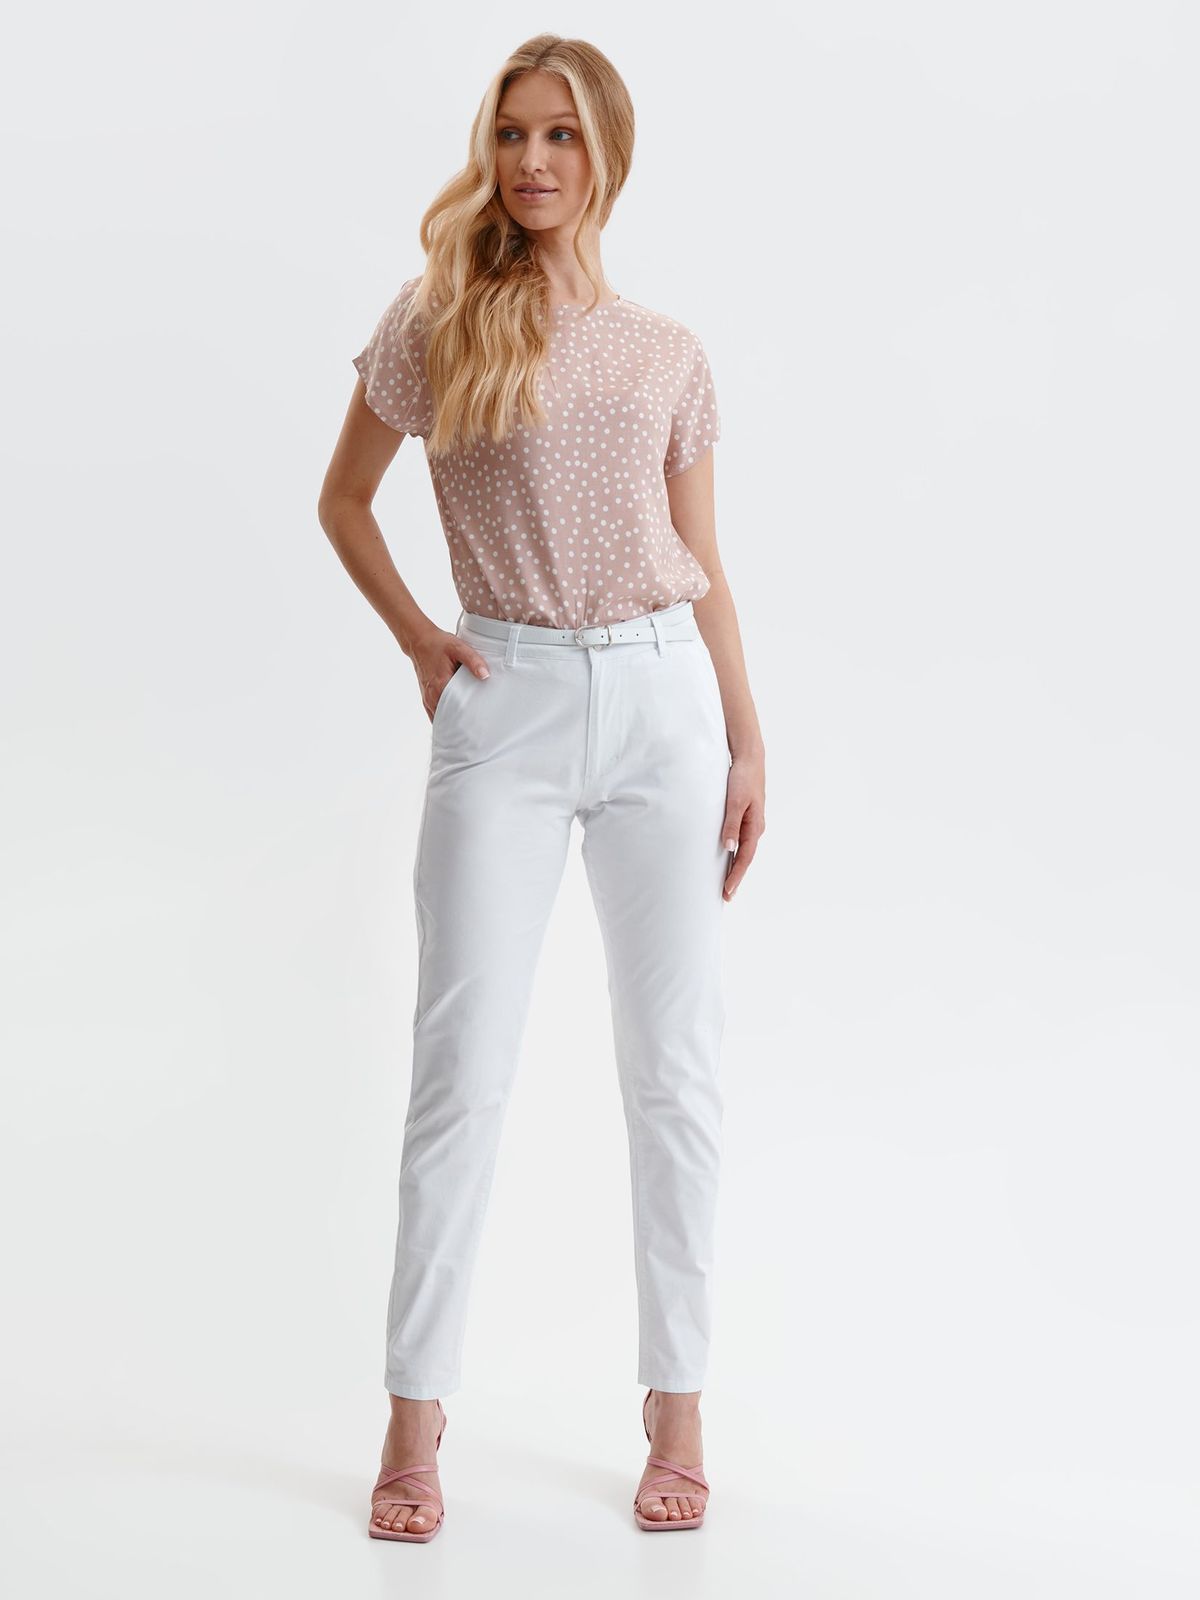 White trousers casual conical medium waist lateral pockets